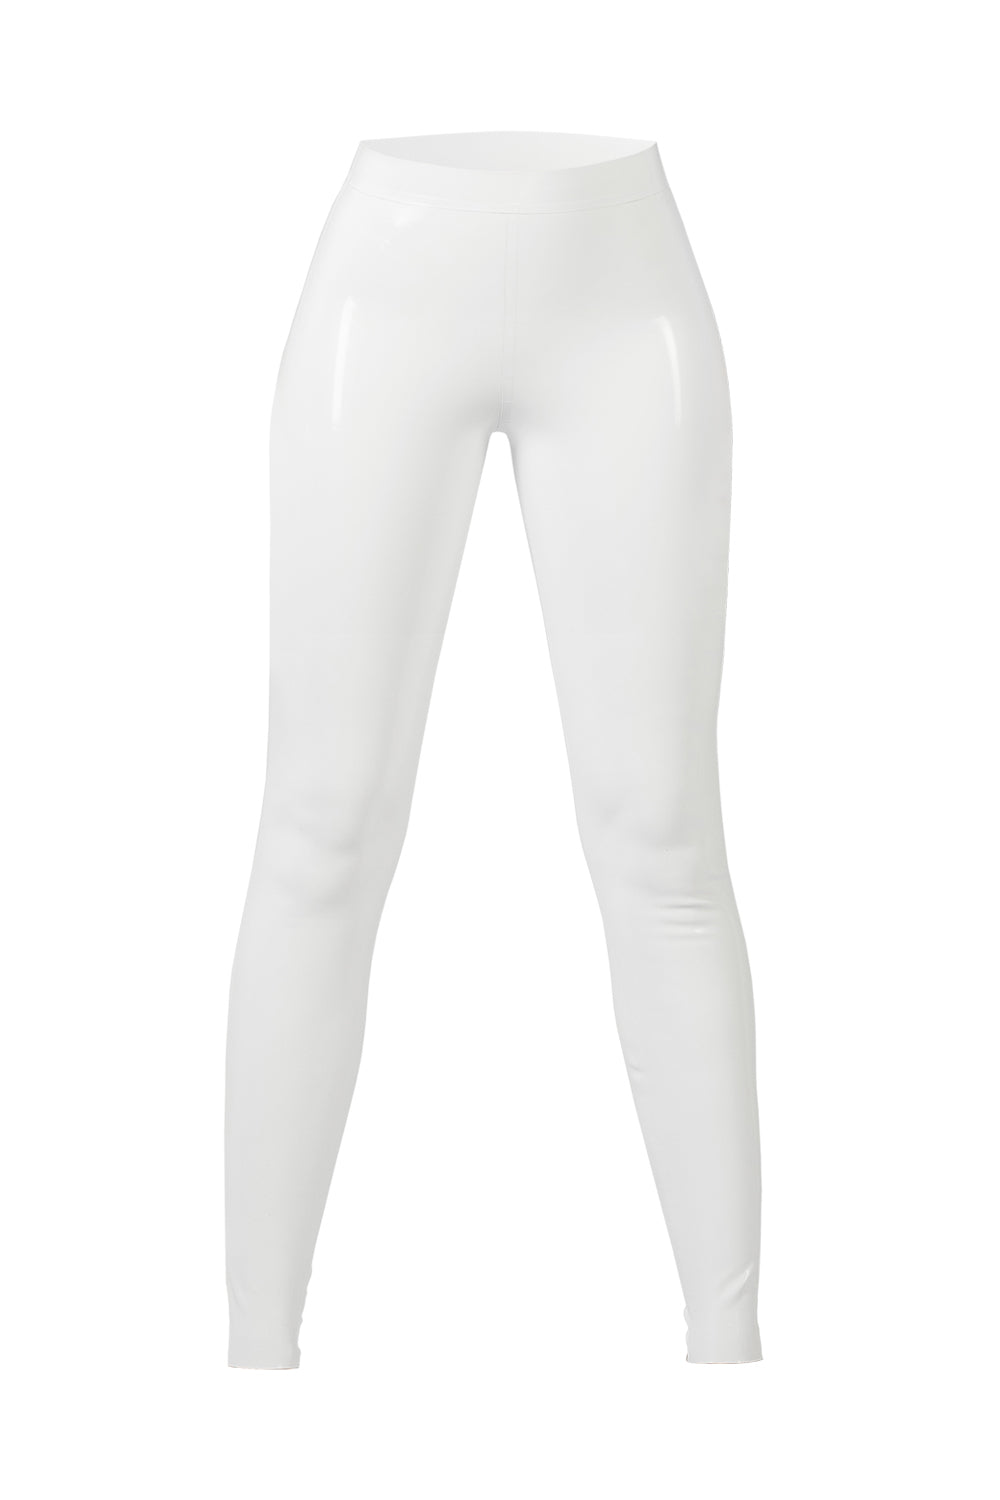 Latex Leggings with Waistband. Apricot